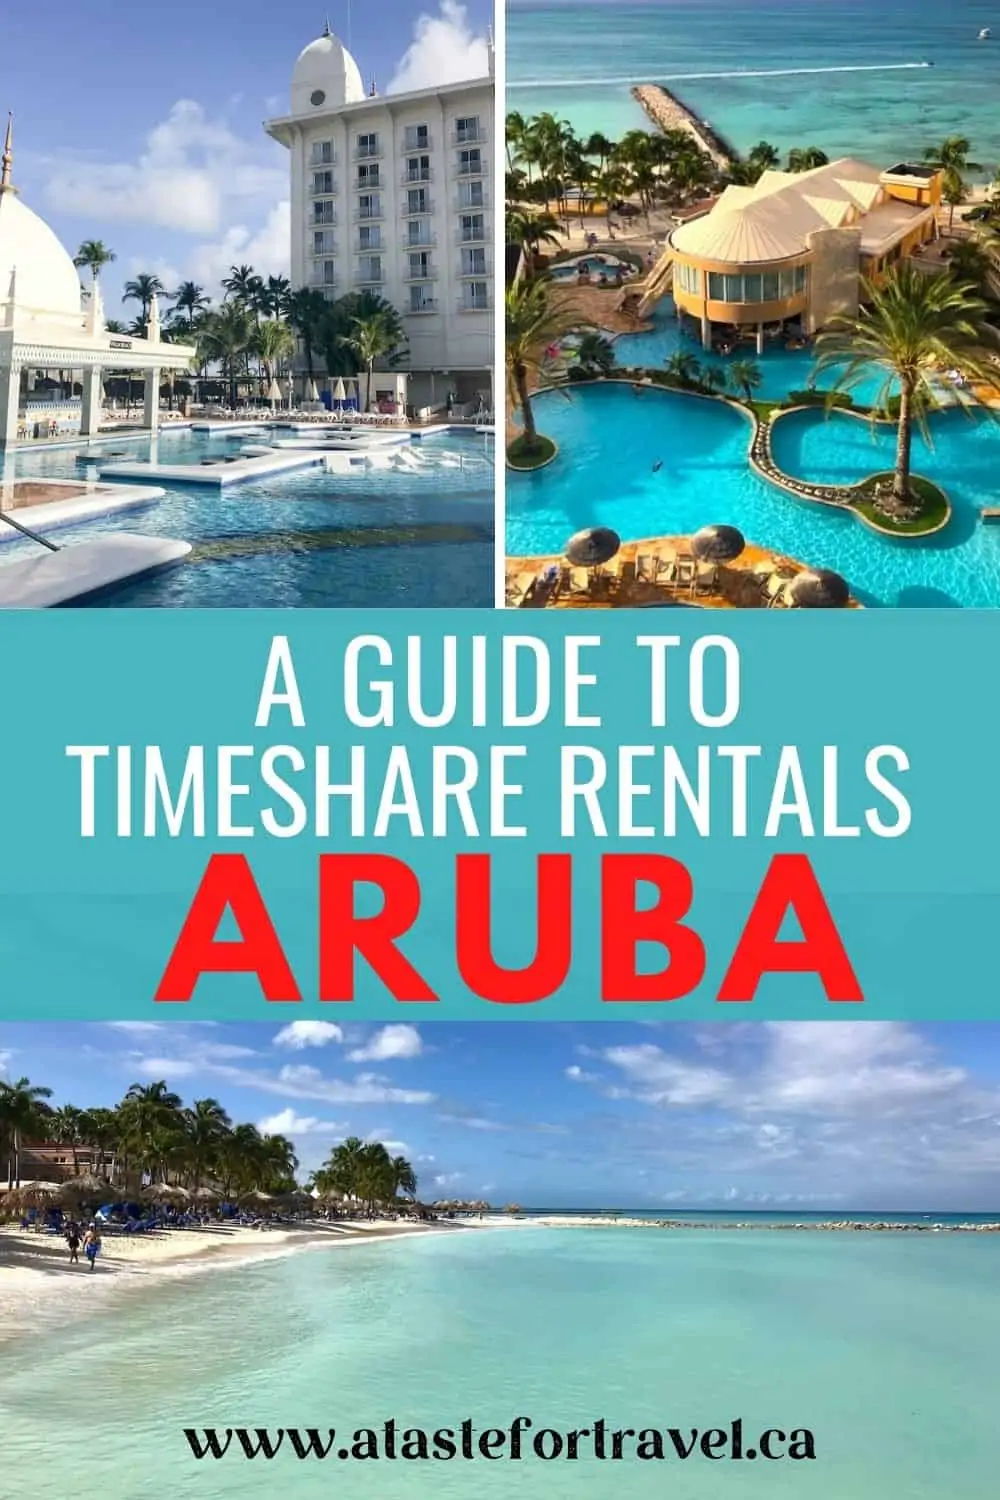 Collage of resorts and beaches in Aruba with Pinterest text overlay.